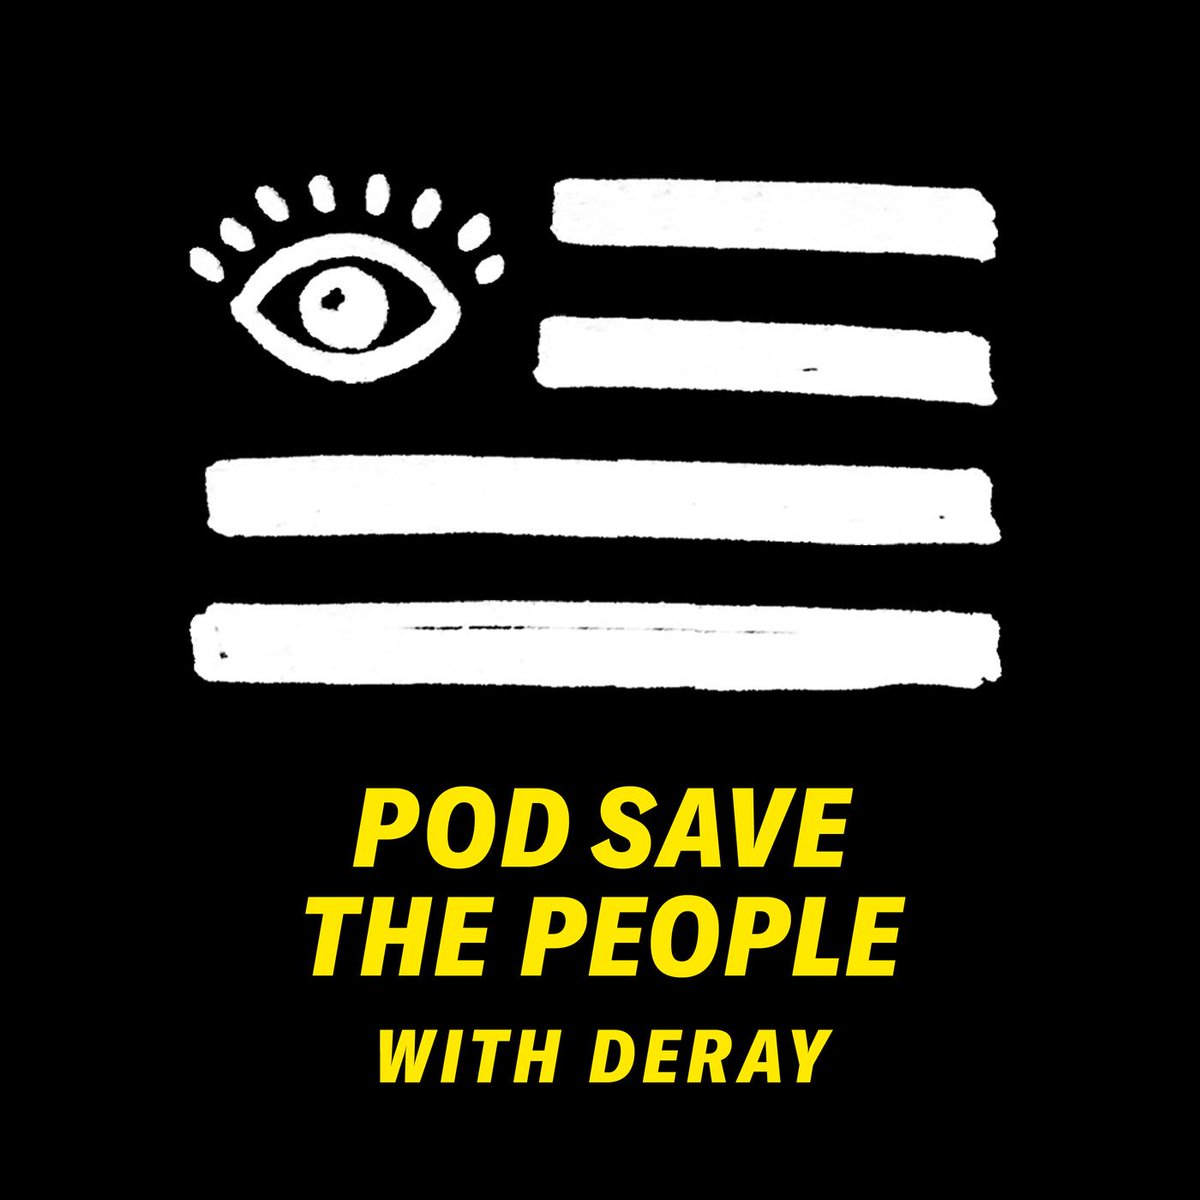 It's #PodcastFriday! We love #PodSaveThePeople! It explores the weekly news and important stories that deserve more attention. We highly reccomend this podcast to anyone interested in learning about social justice through an intersectional lens. Happy listening! #SMUHumanRights